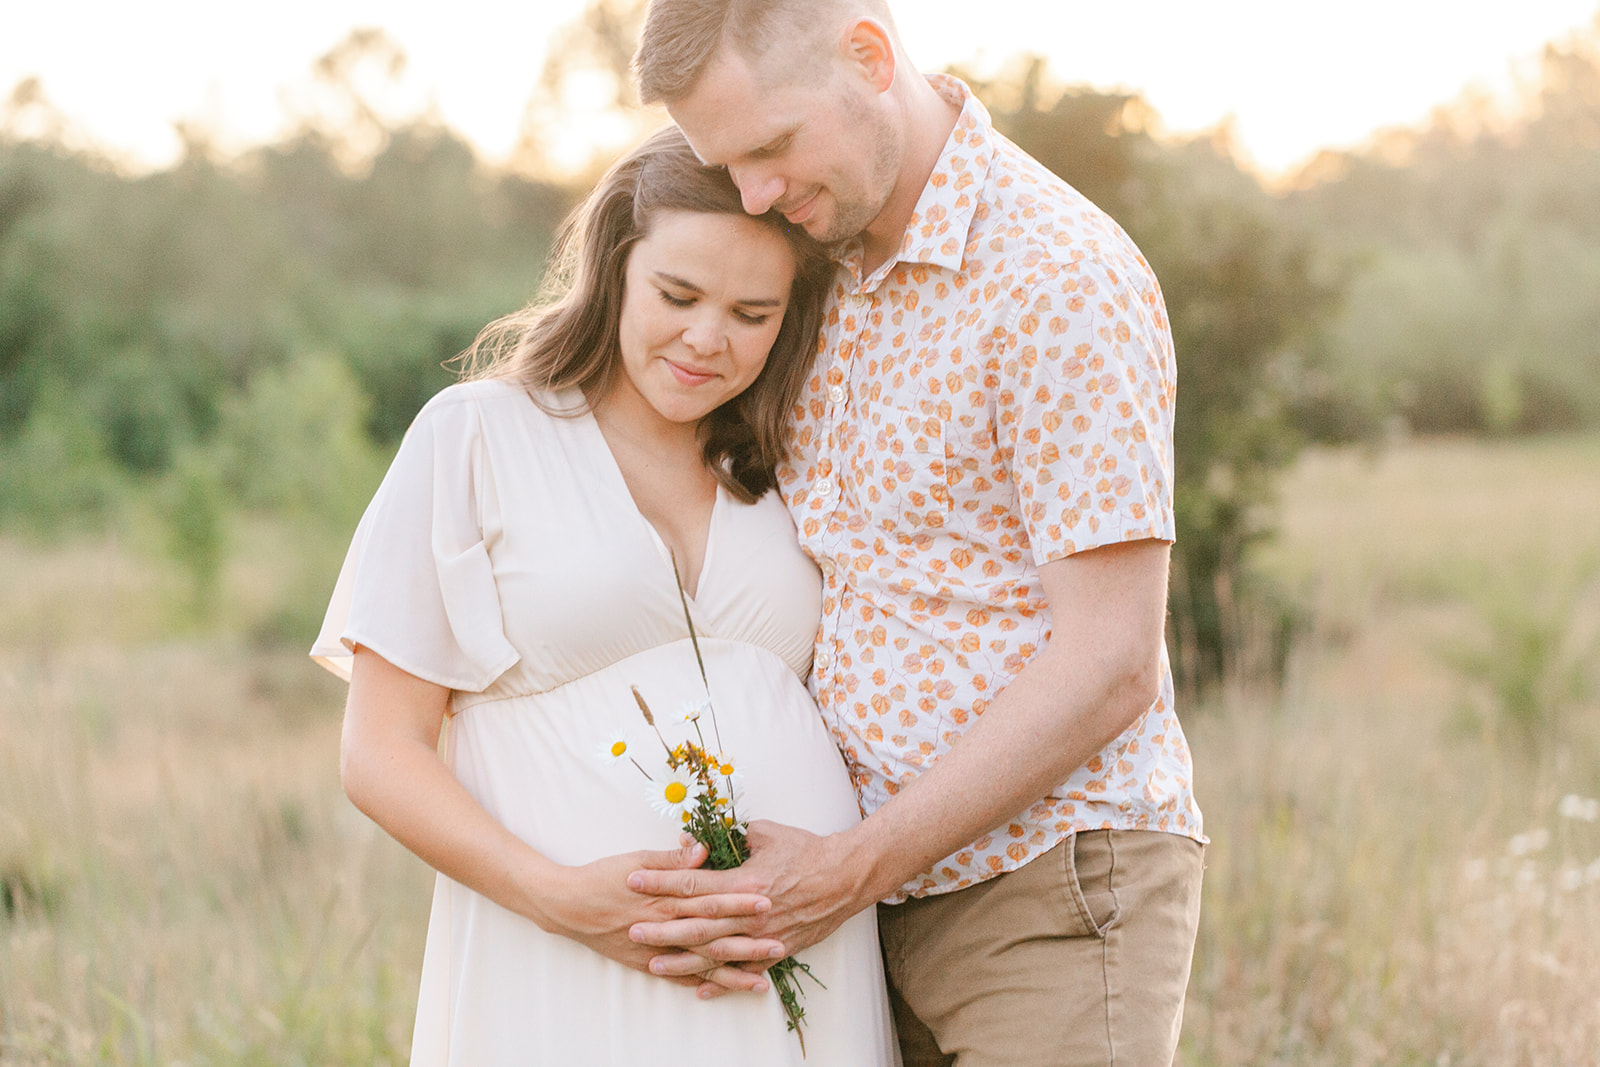 Expecting parents smile while holding the bump in a field of tall grass at sunset